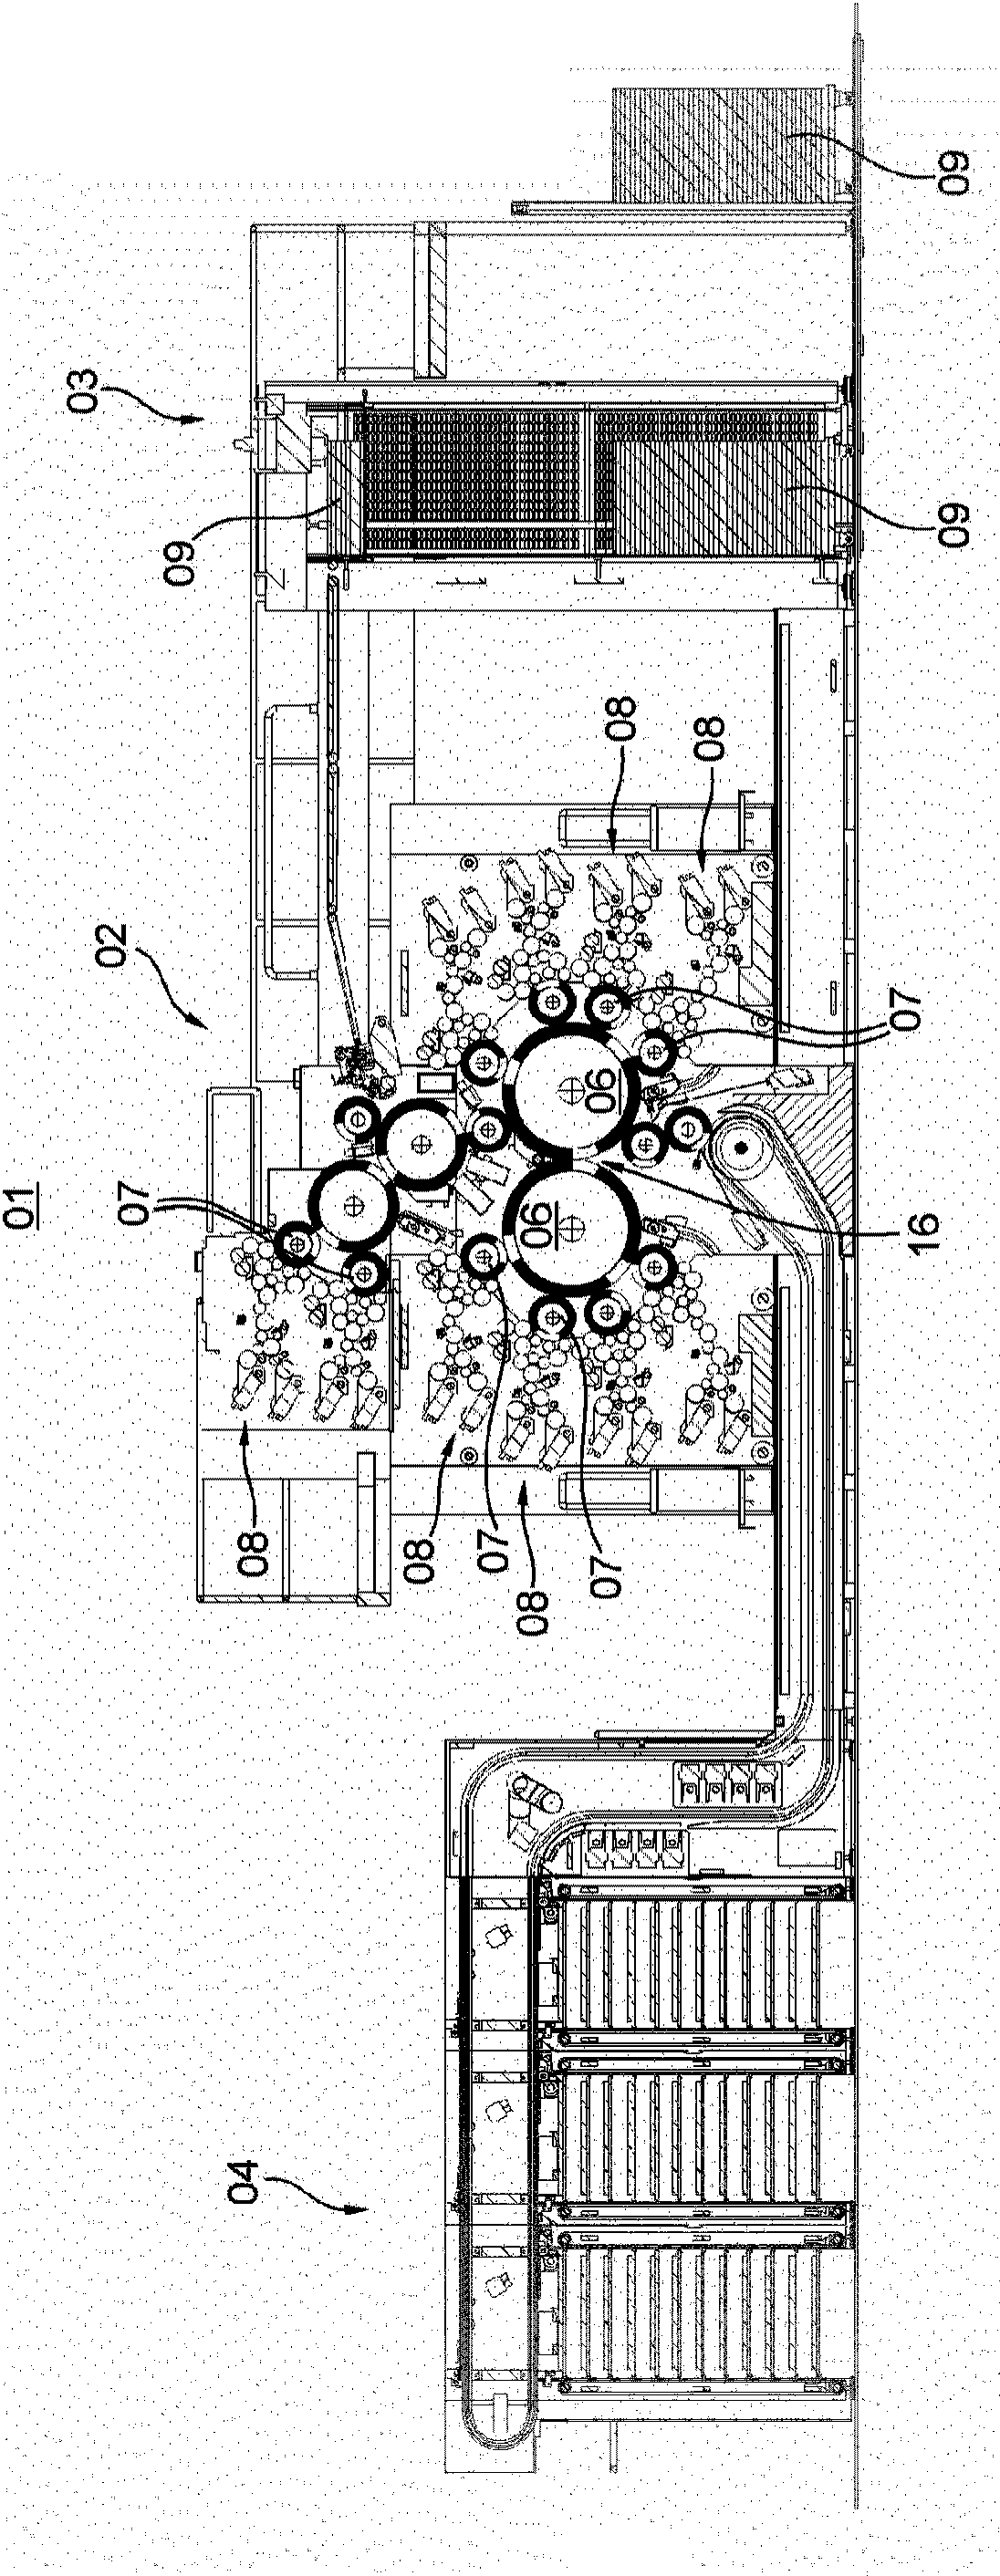 Method for arranging a printing plate on a plate cylinder by means of a tensioning slide